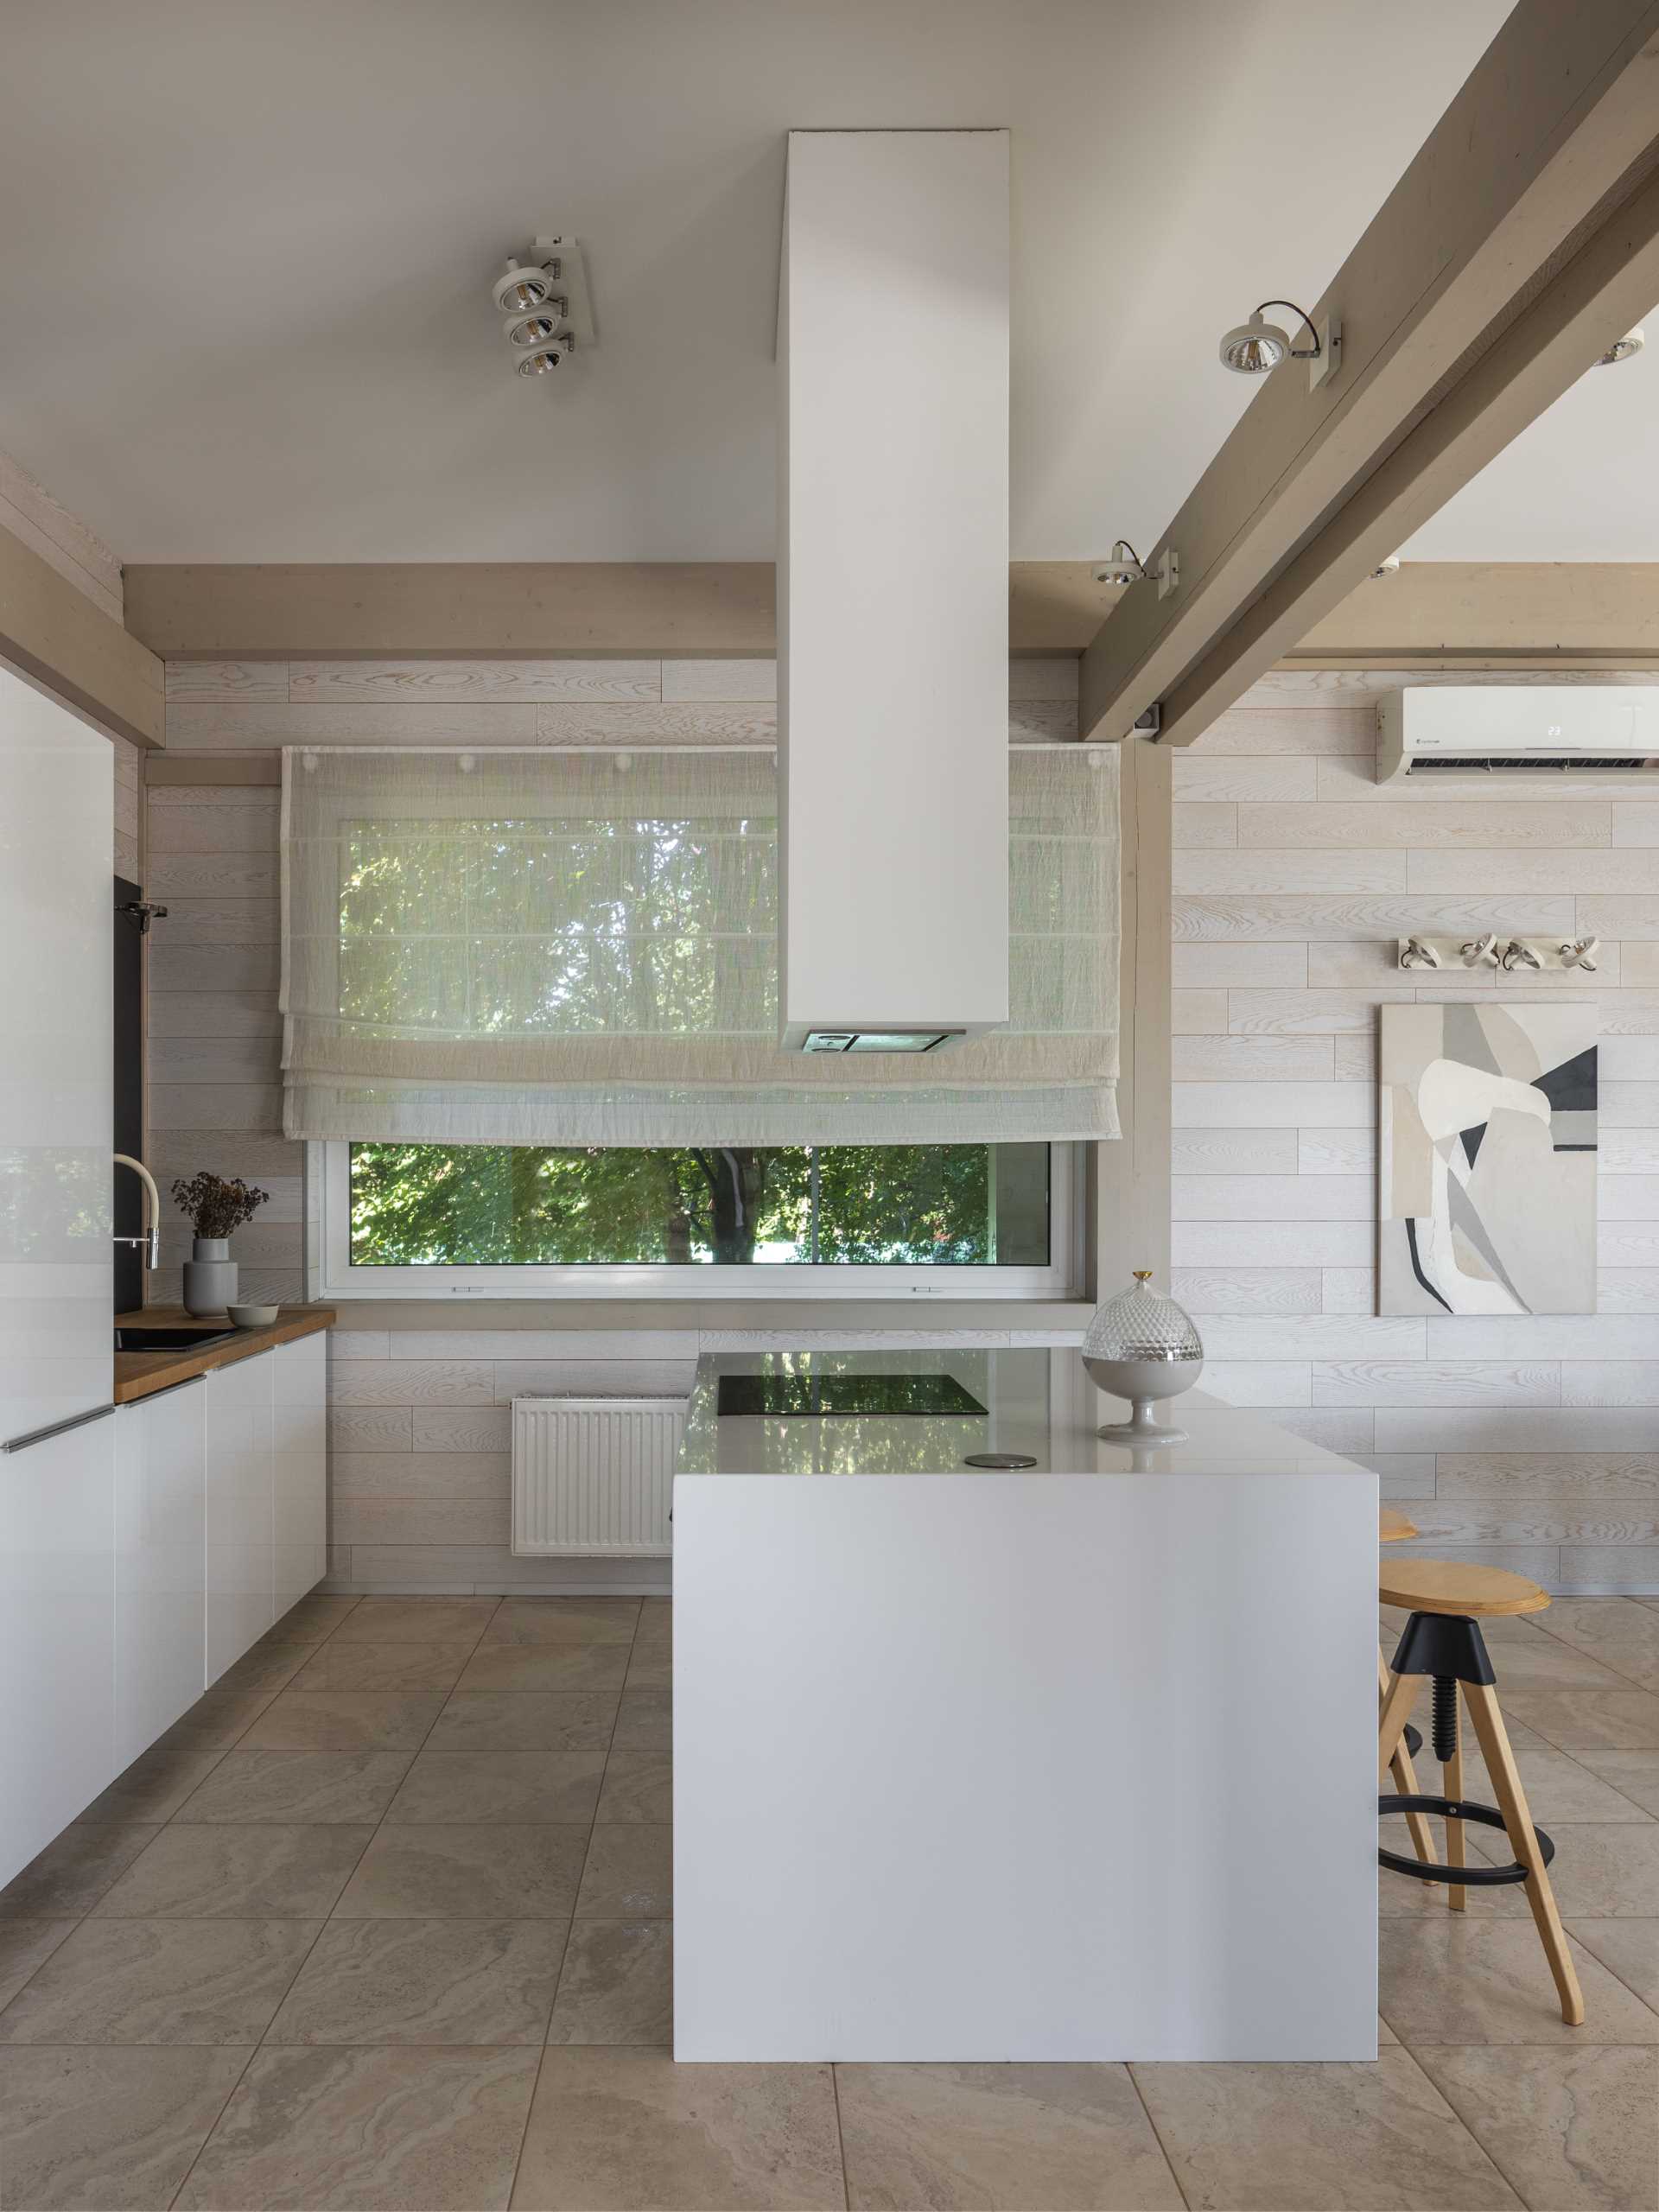 In this kitchen, the white cabinets have been paired with wood accents for a contemporary finish.